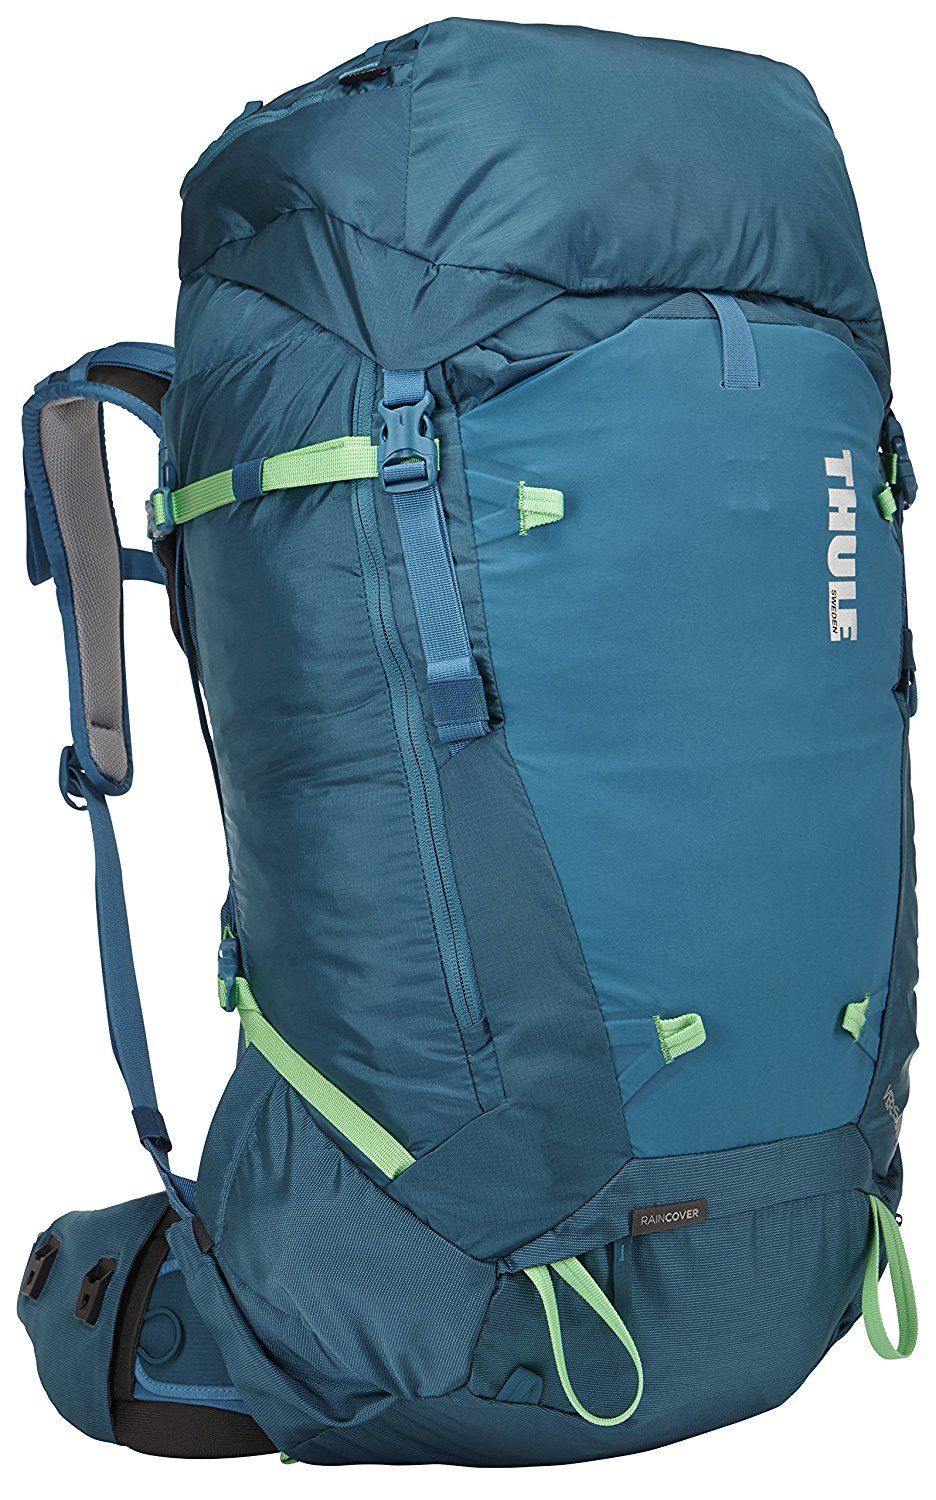 List of 10 Best Travel Backpacks With Their Cost, Capacity, And Other ... - 1511950028 1511949806 91Dqfcrbazl Sl1500